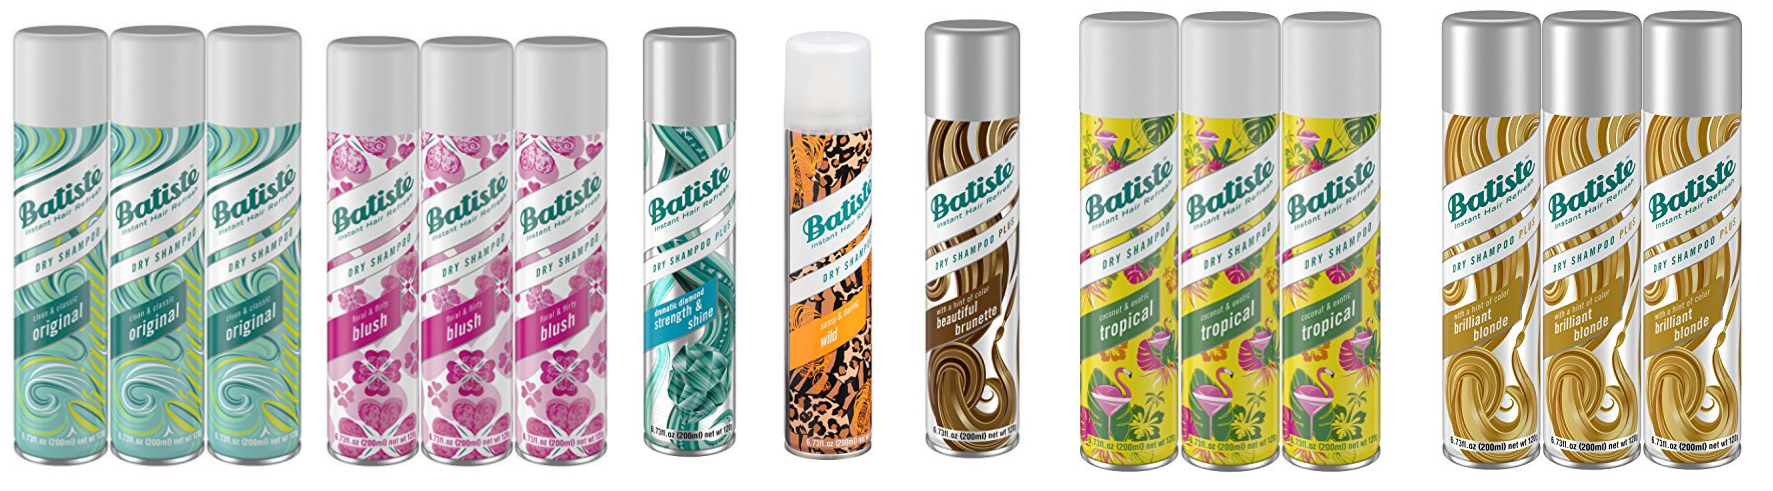 Batiste Dry Shampoo Coupon = Lots of Deals on Dry Shampoo Products!